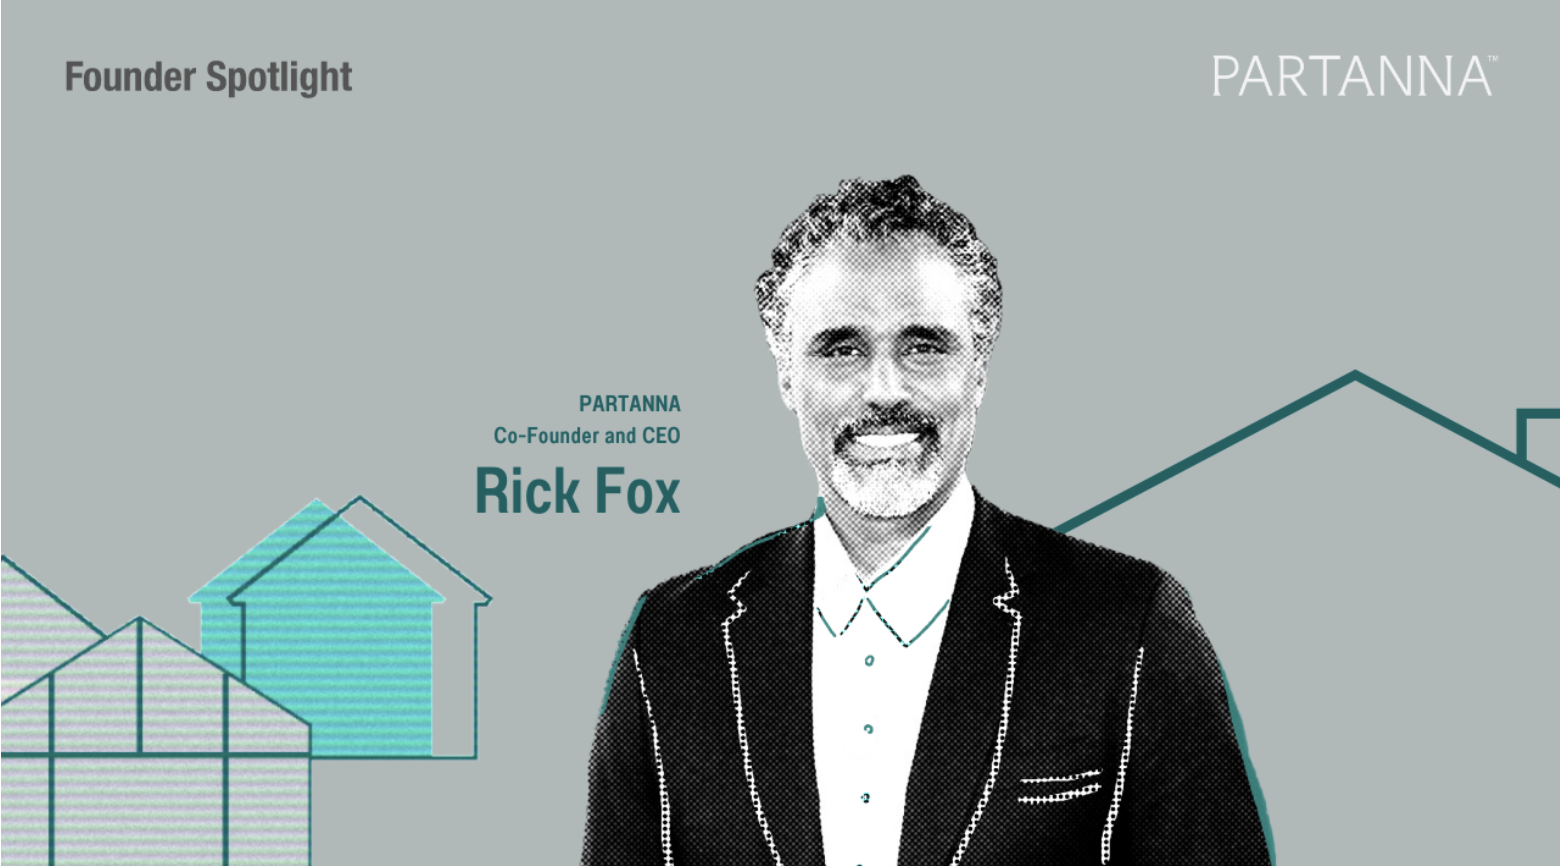 (Rick Fox, the Co-Founder and CEO of Partanna. Photo credit: Cherubic​​ Ventures)